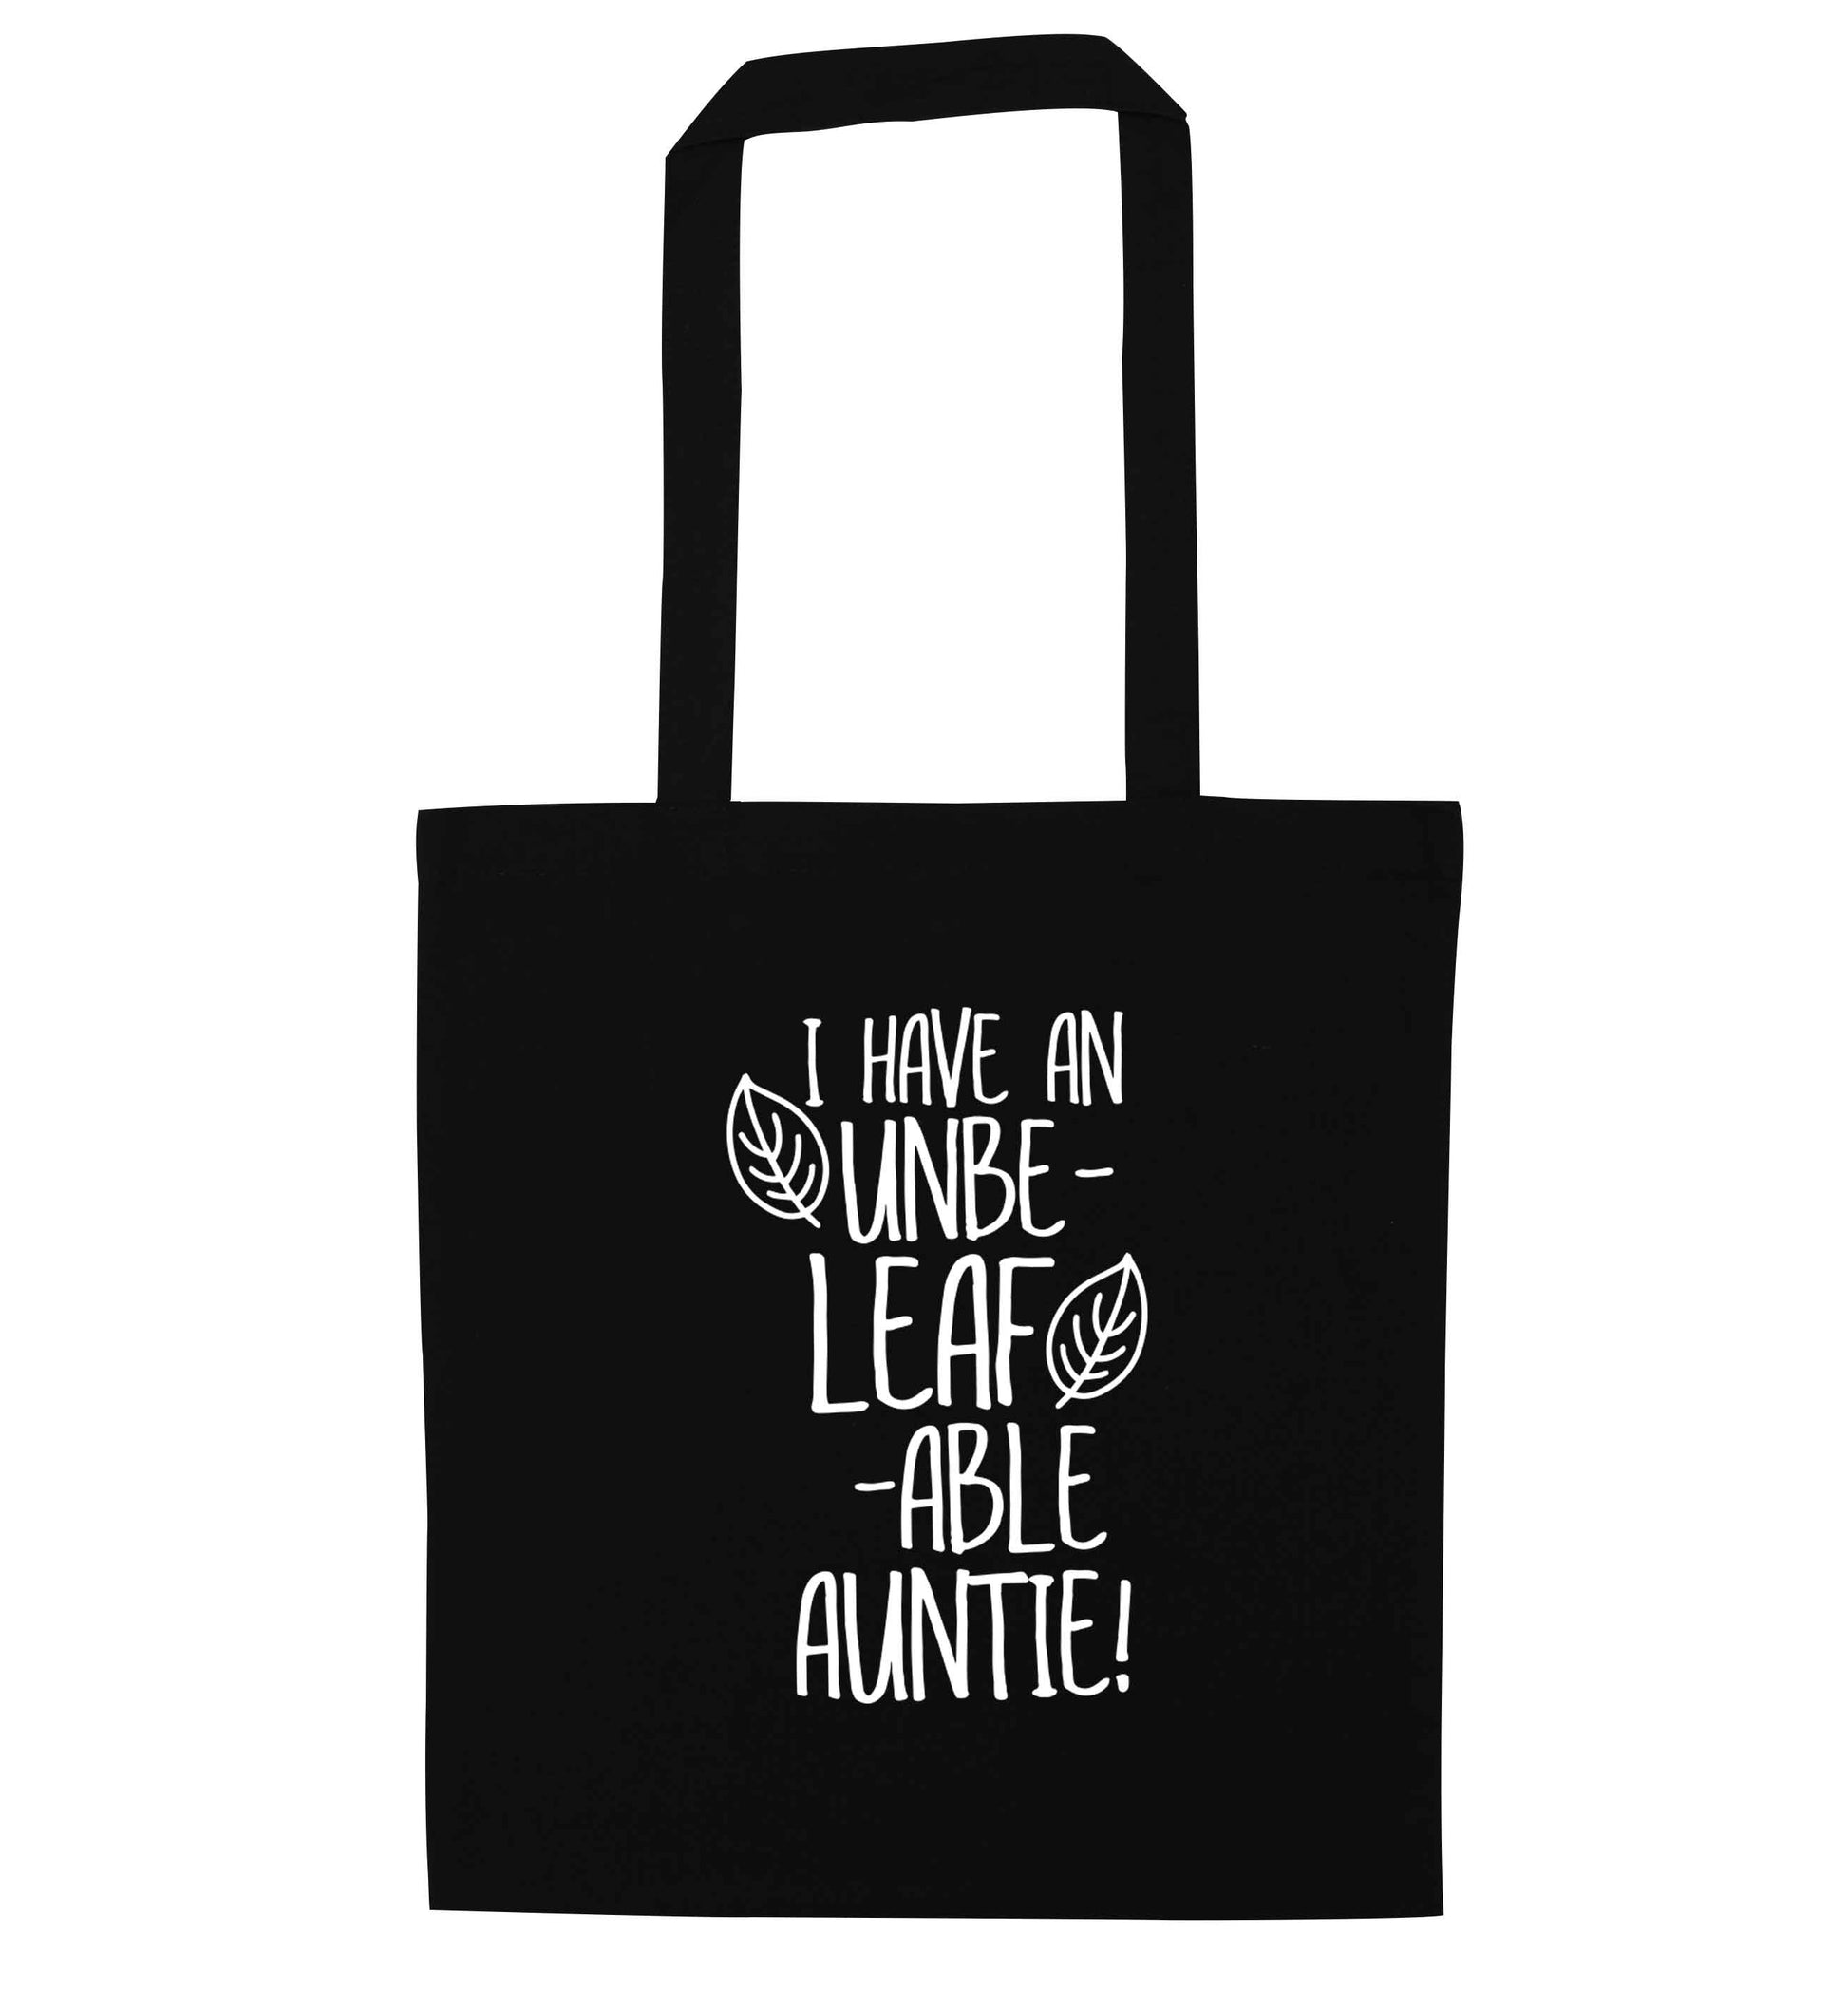 I have an unbe-leaf-able auntie black tote bag